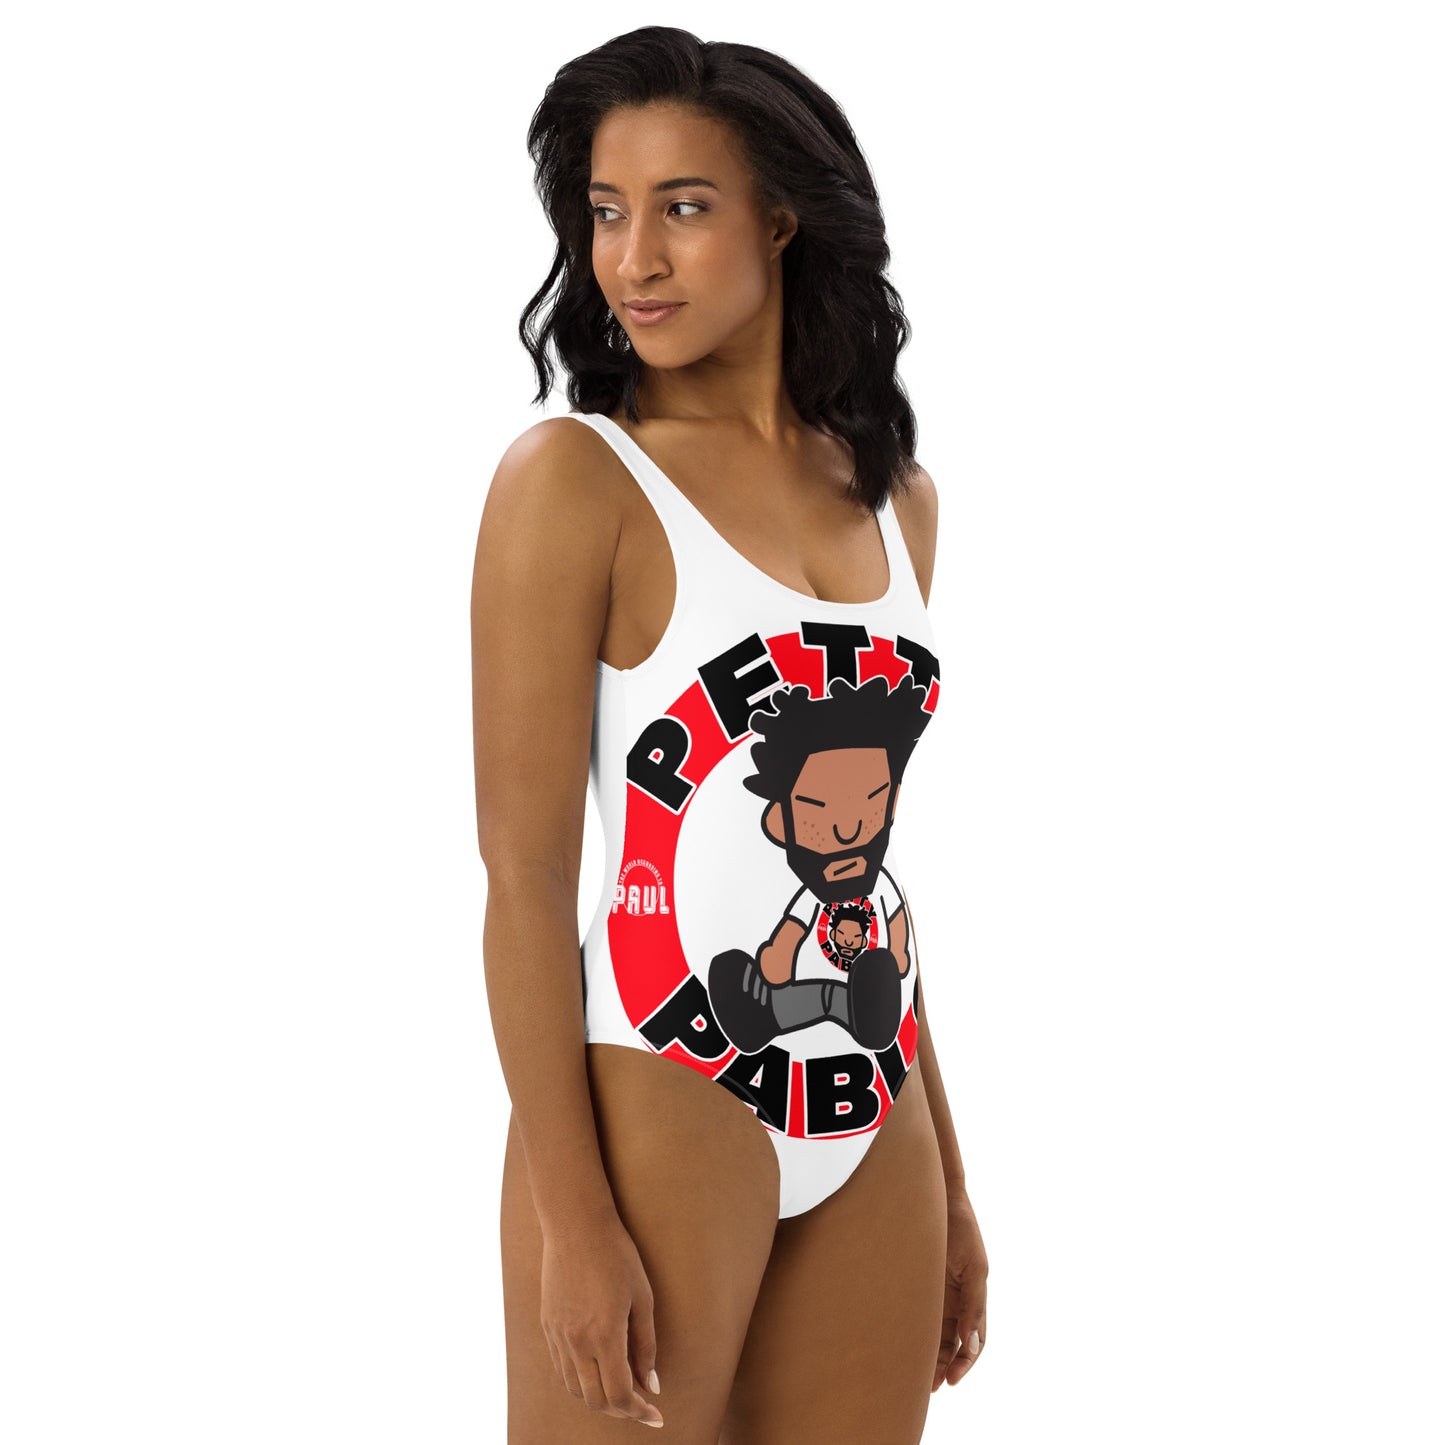 Lets Get Wet One-Piece Swimsuit